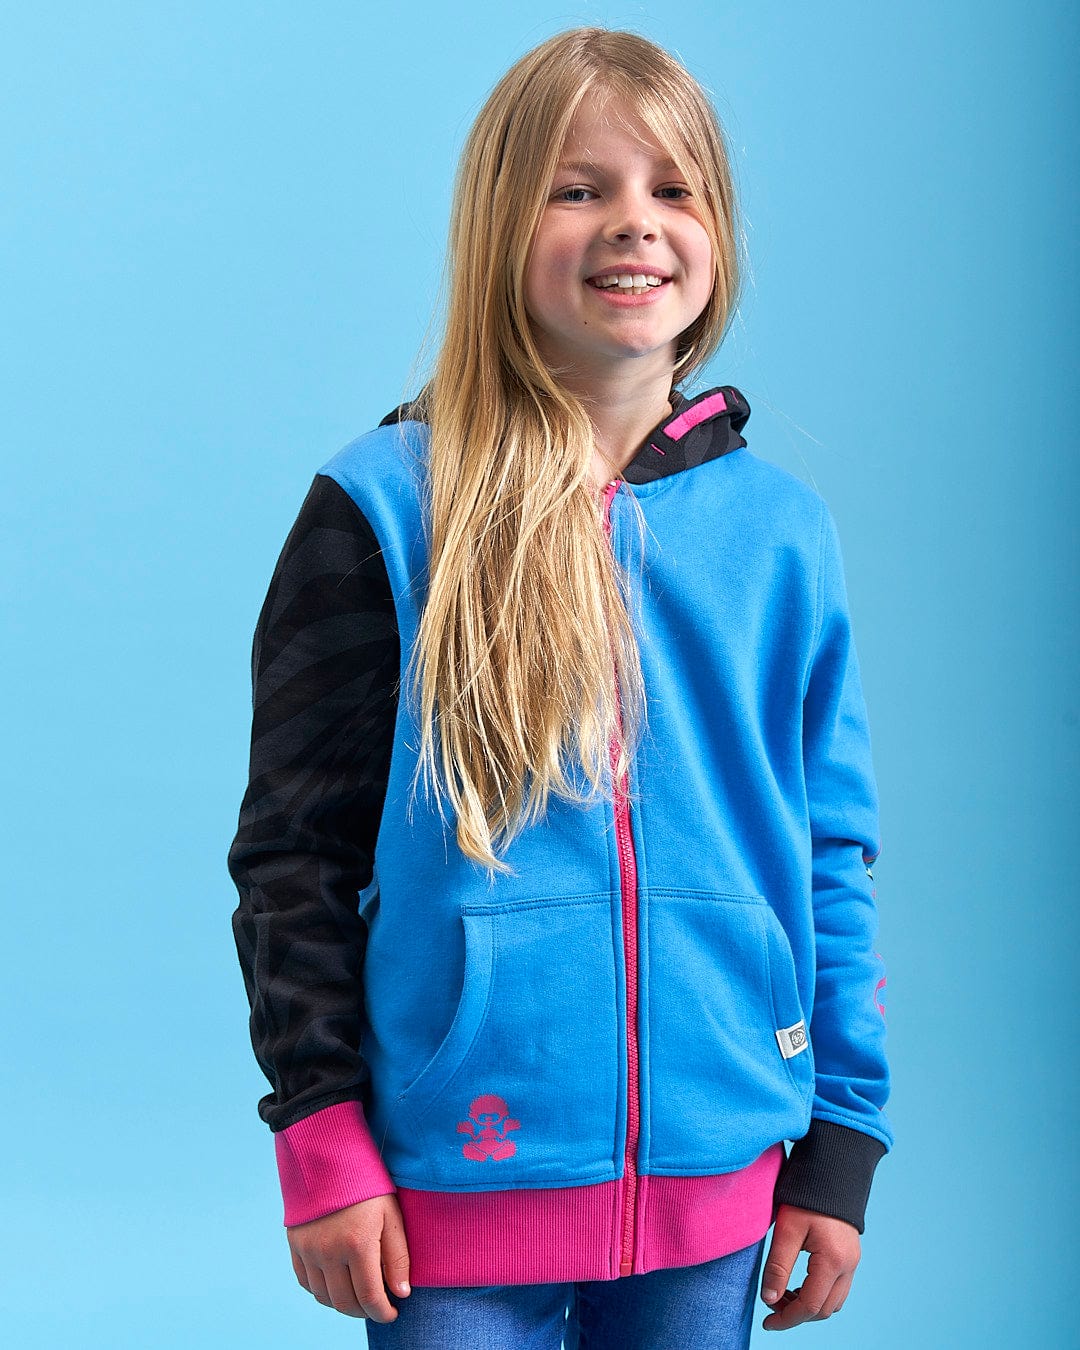 A young girl wearing a Saltrock Cara - Girls Zip Hoodie - Blue and jeans.